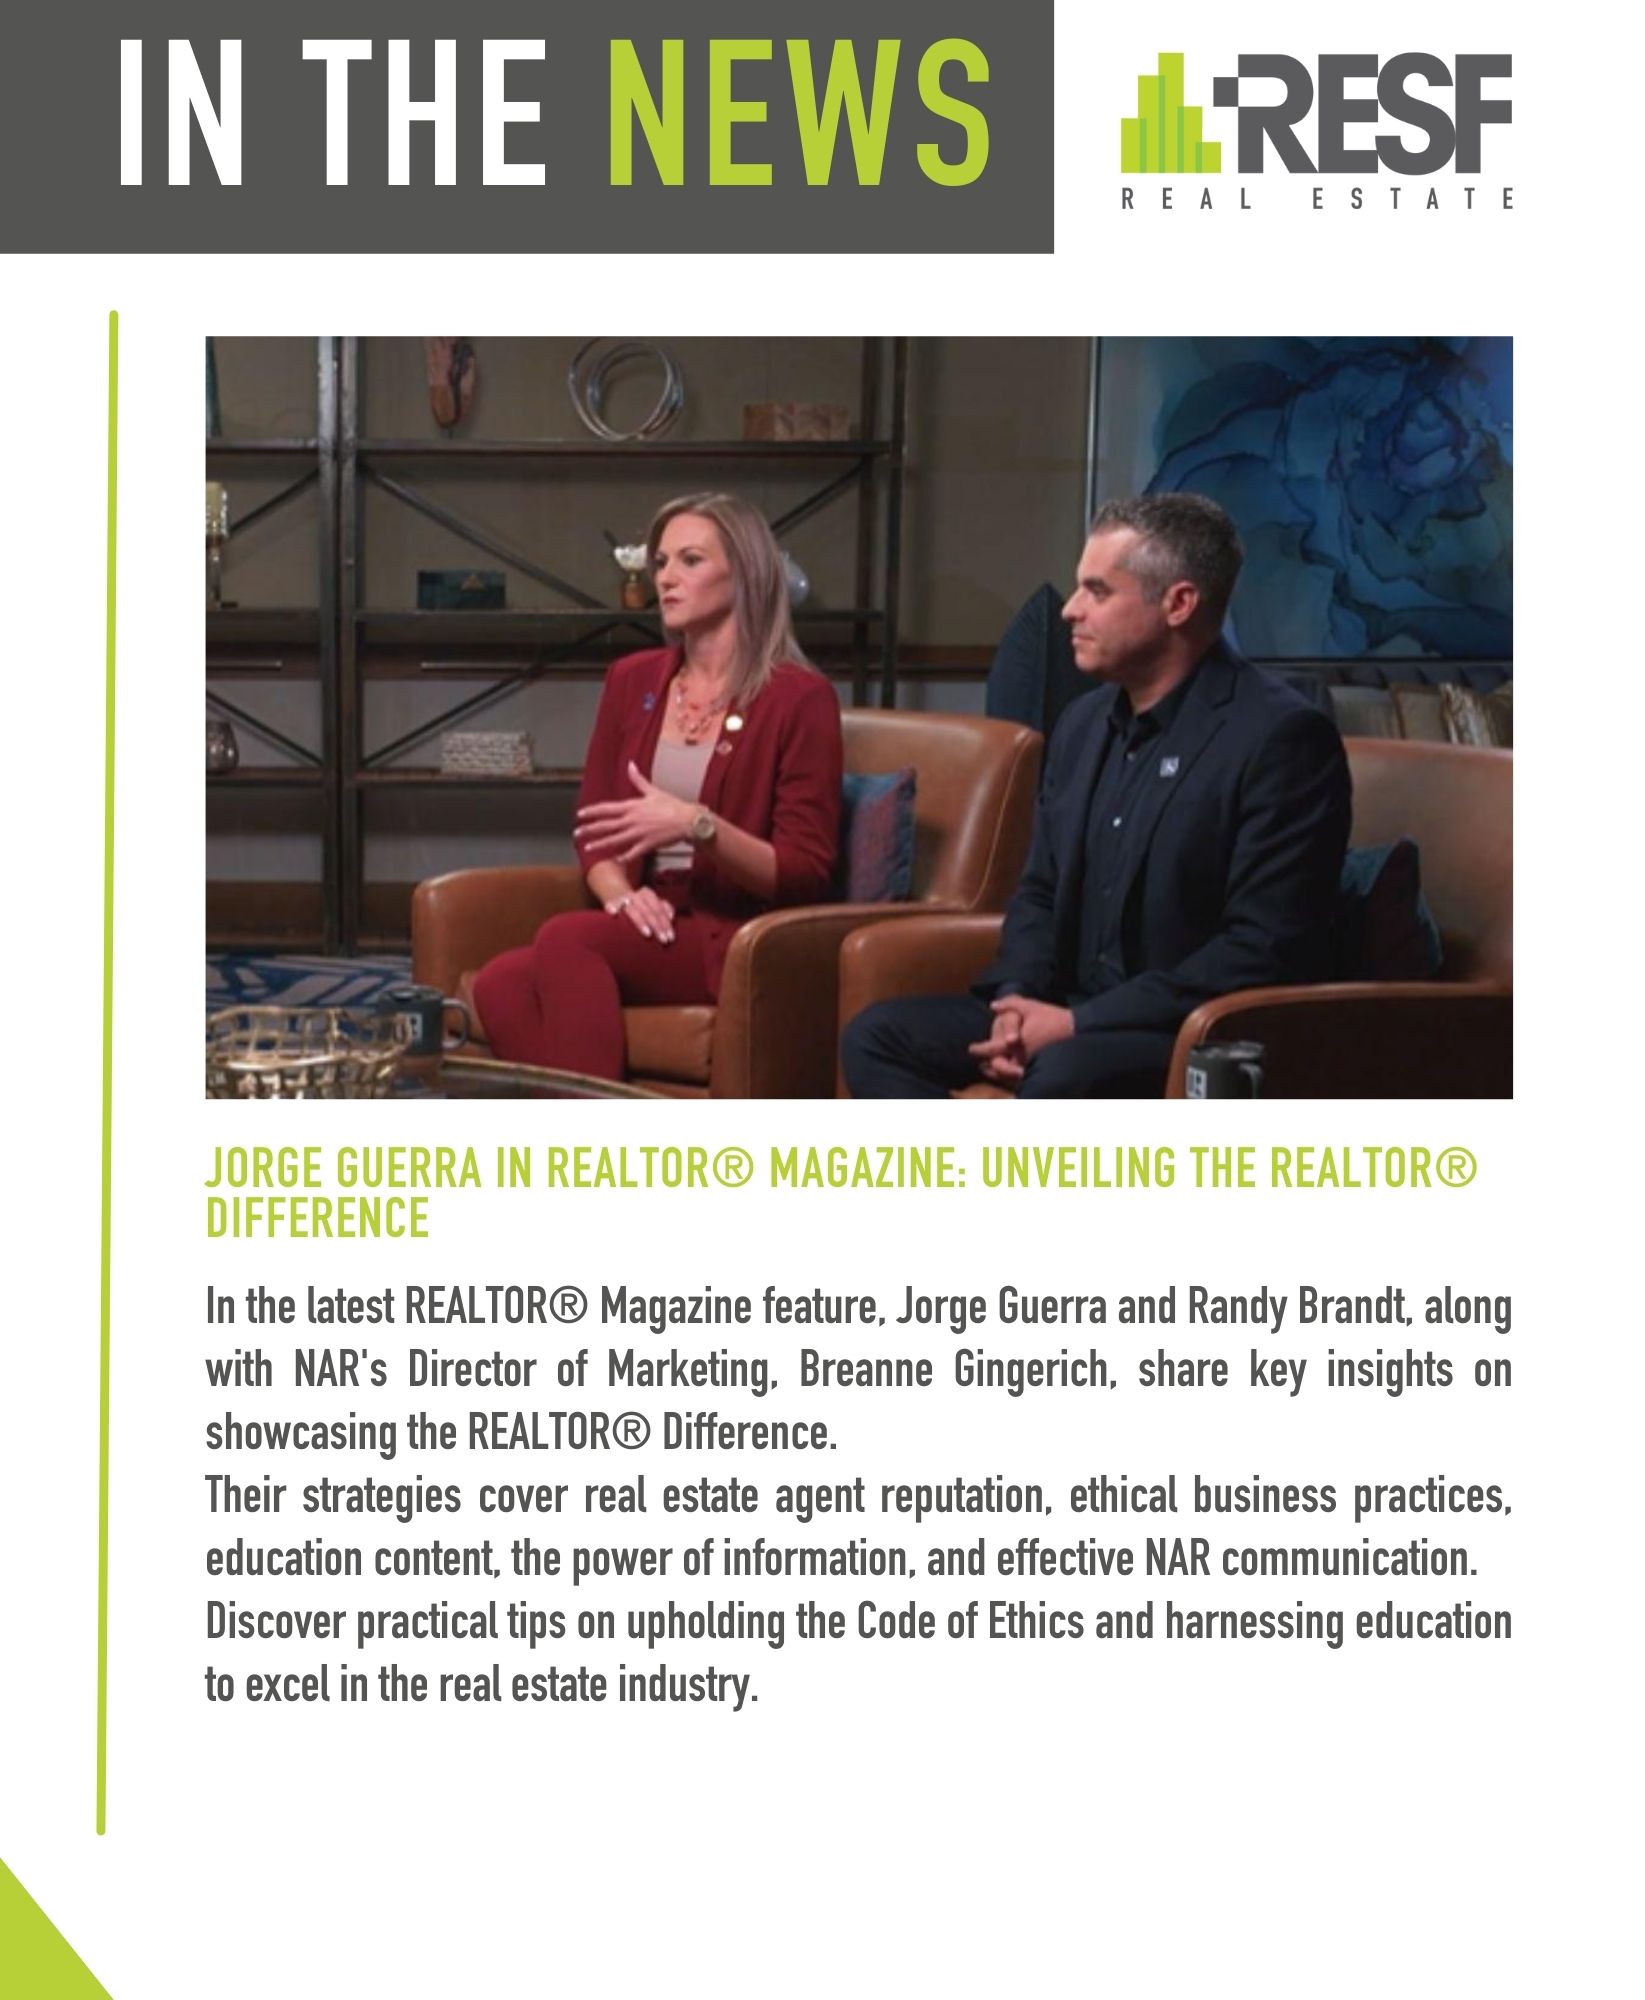 Jorge Guerra in REALTOR® Magazine: Unveiling the REALTOR® Difference